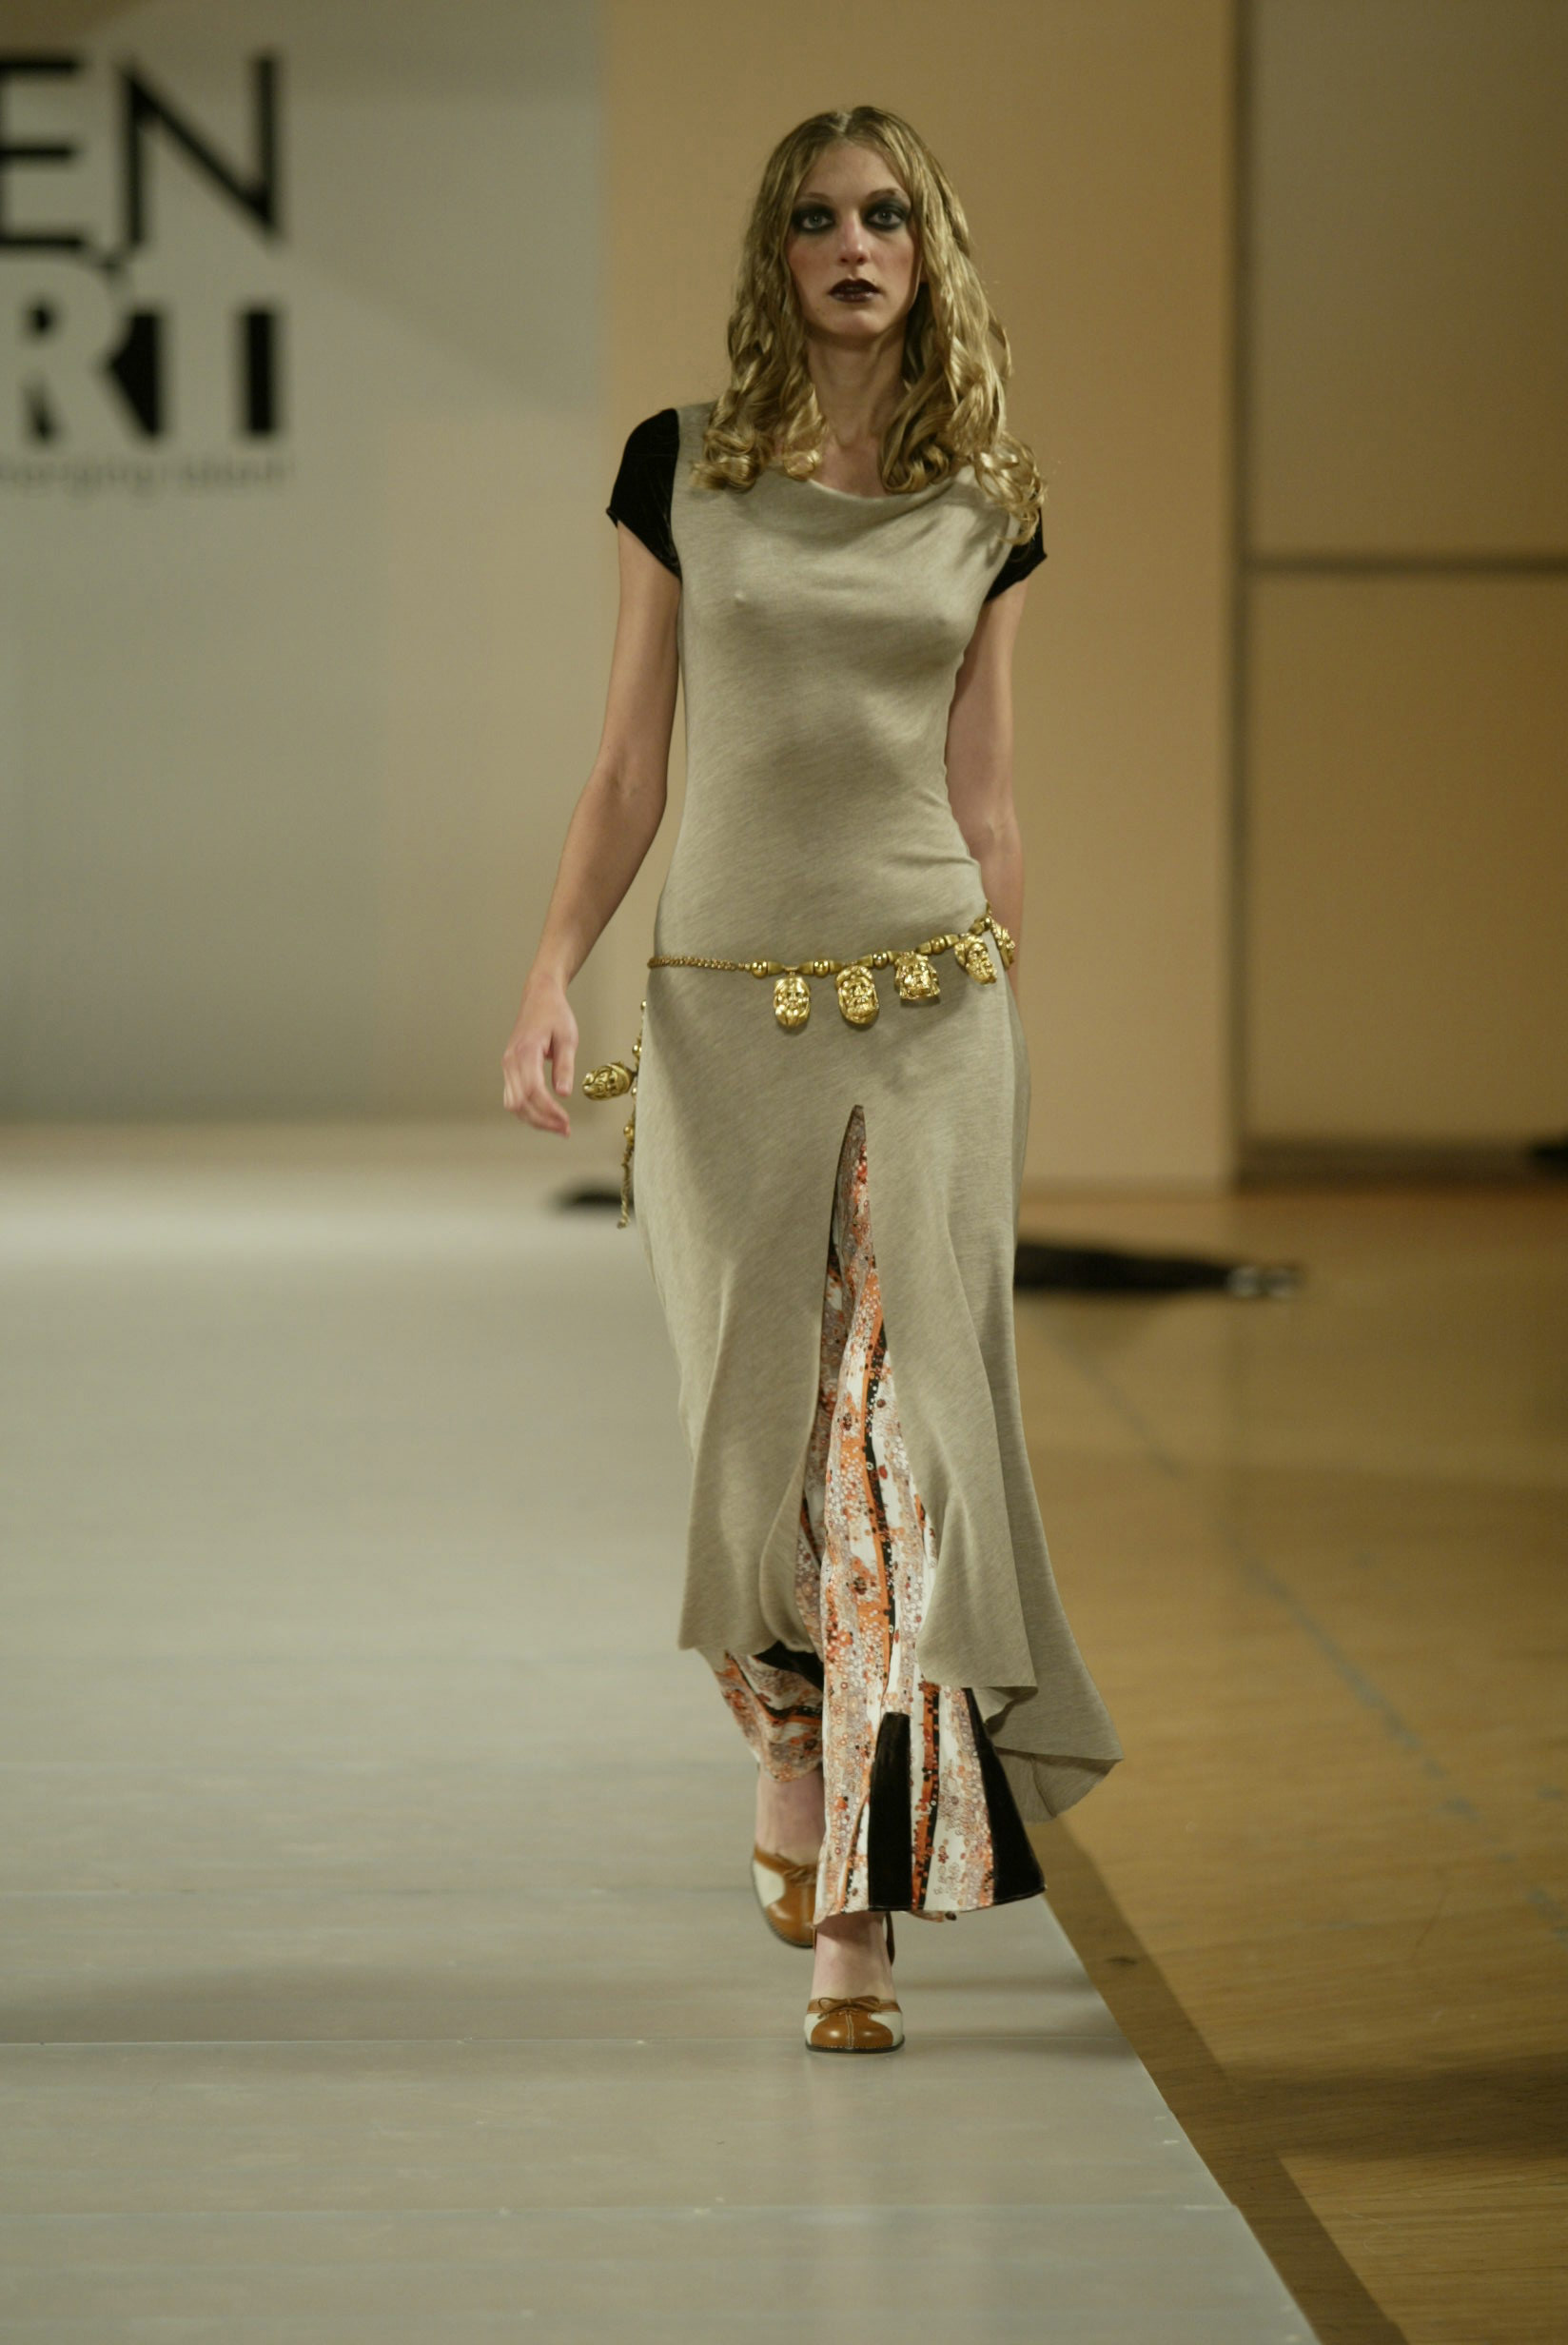 Mageina Tovah for Jared Gold Couture Gen Art Fashion Show